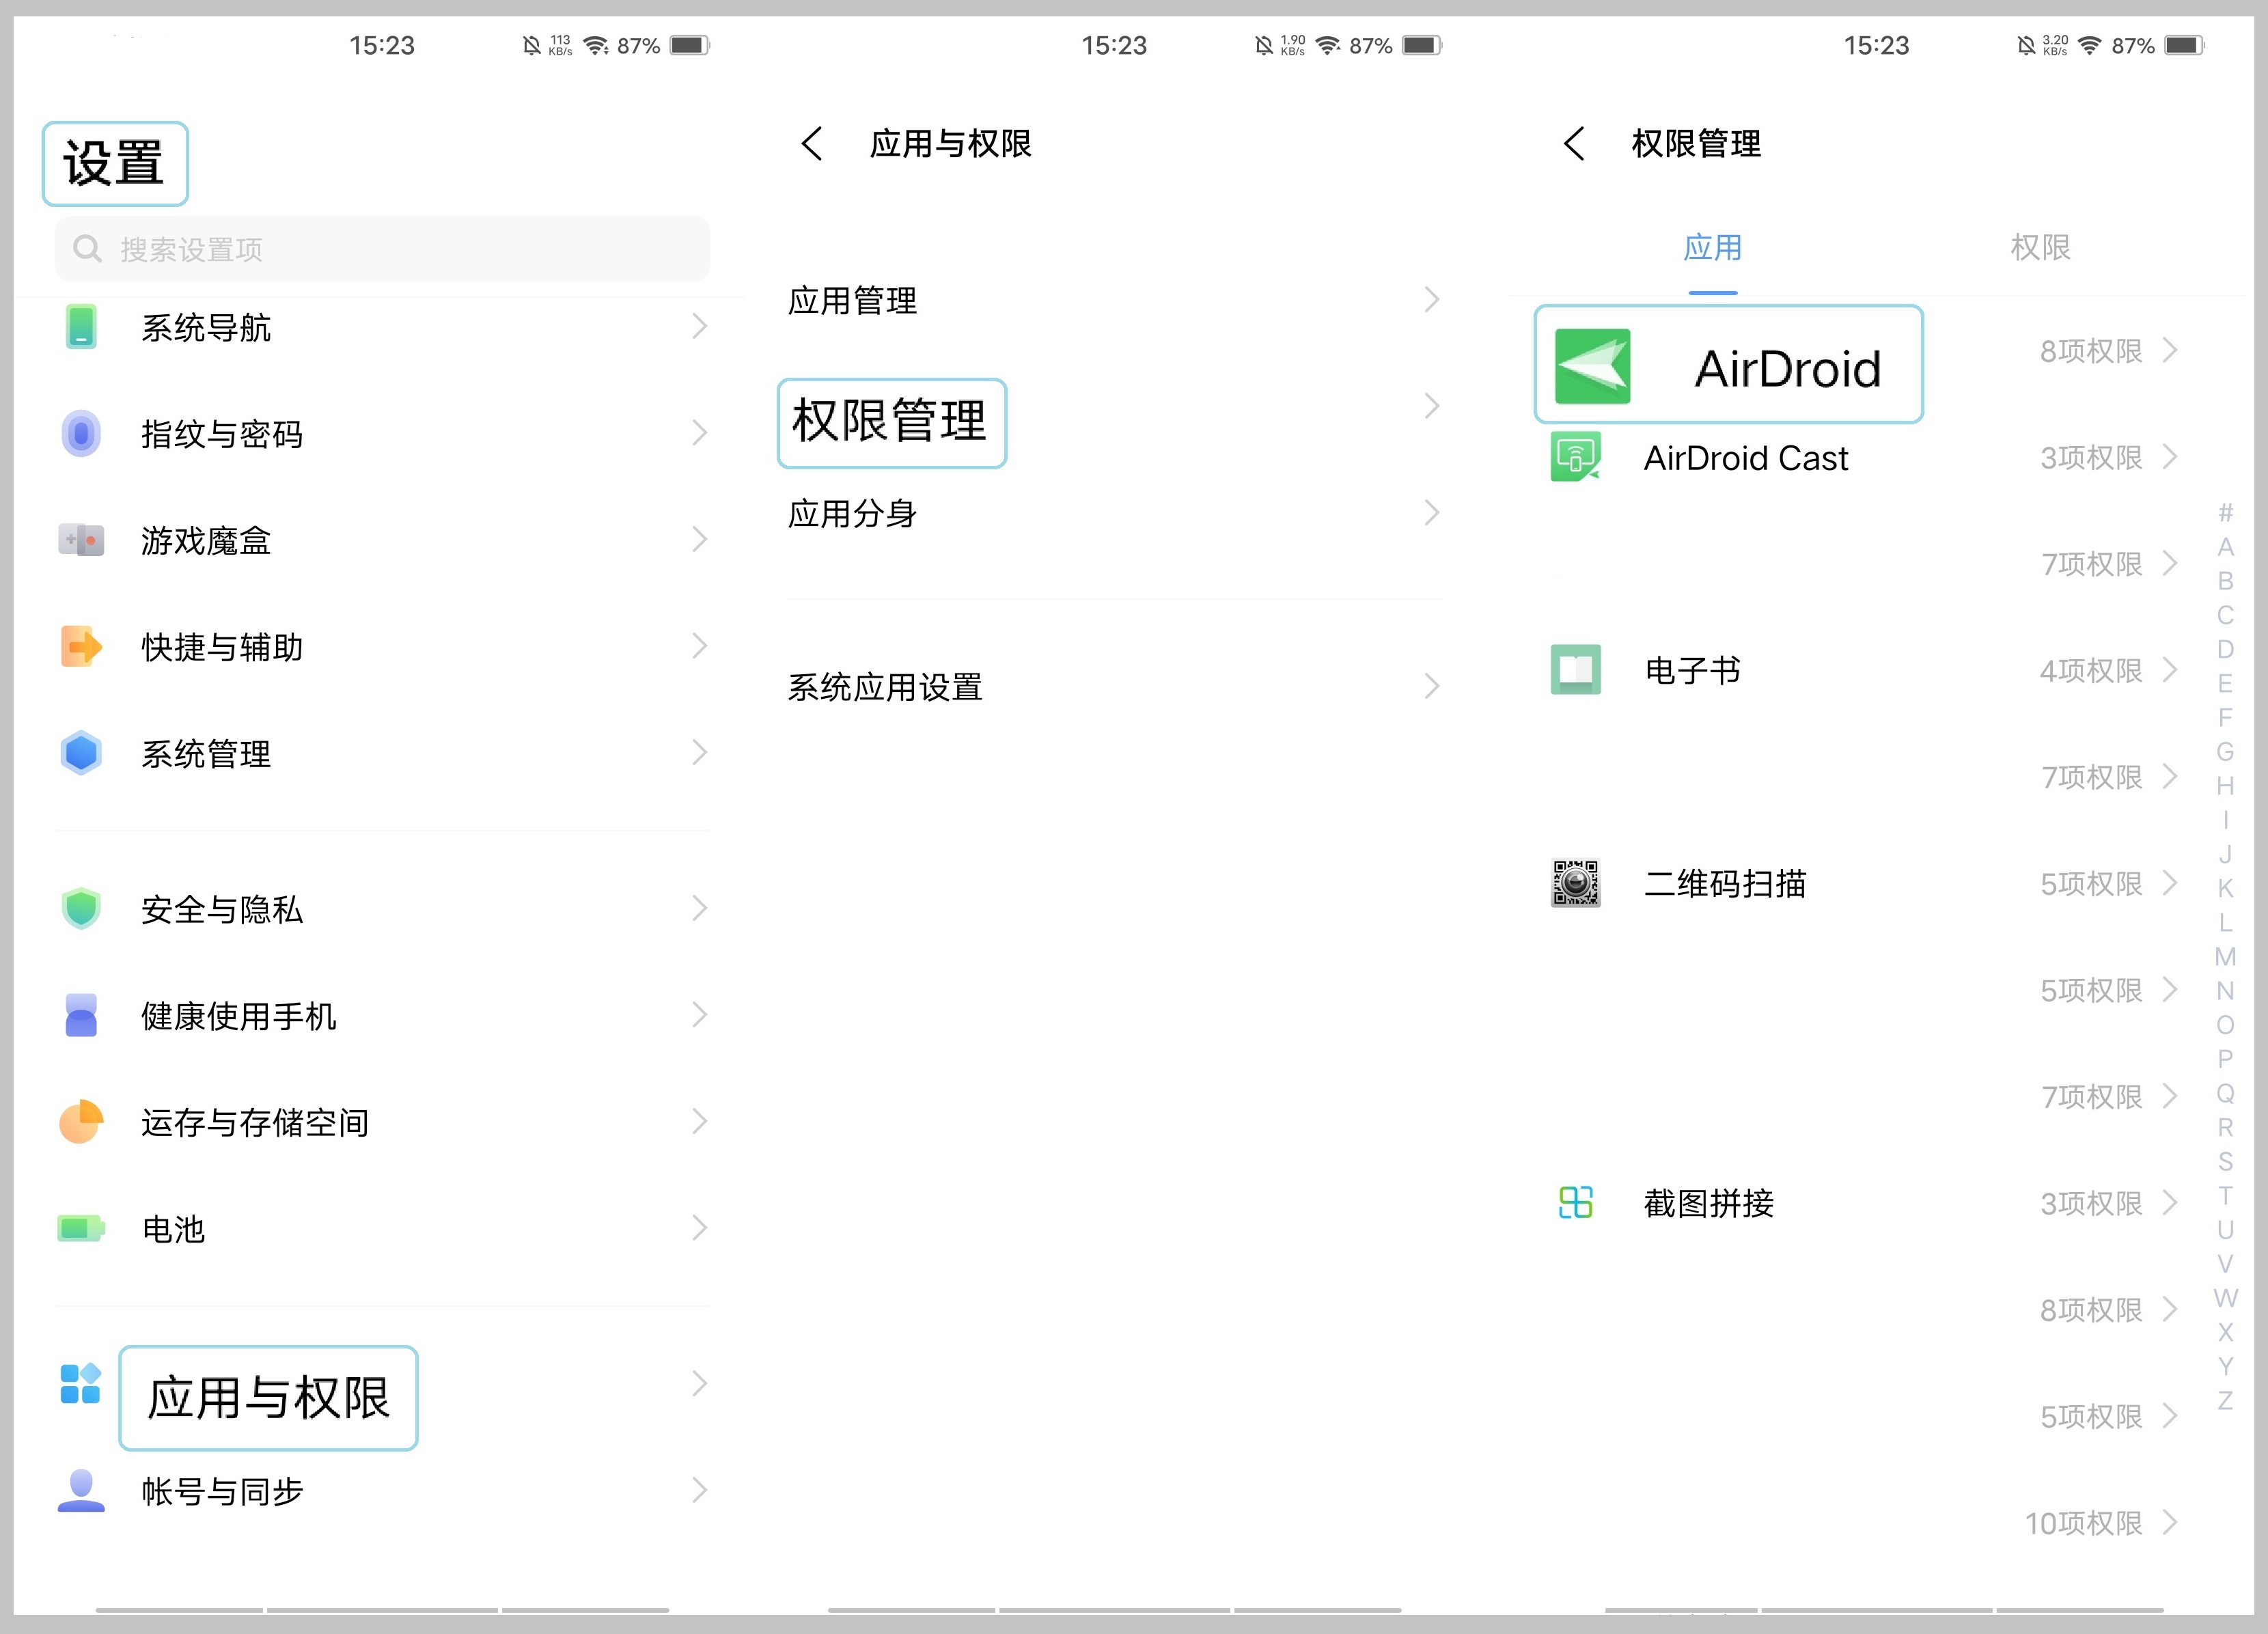 cn_-_Android_10_-_keep_AirDroid_running_on_vivo_-3.jpg